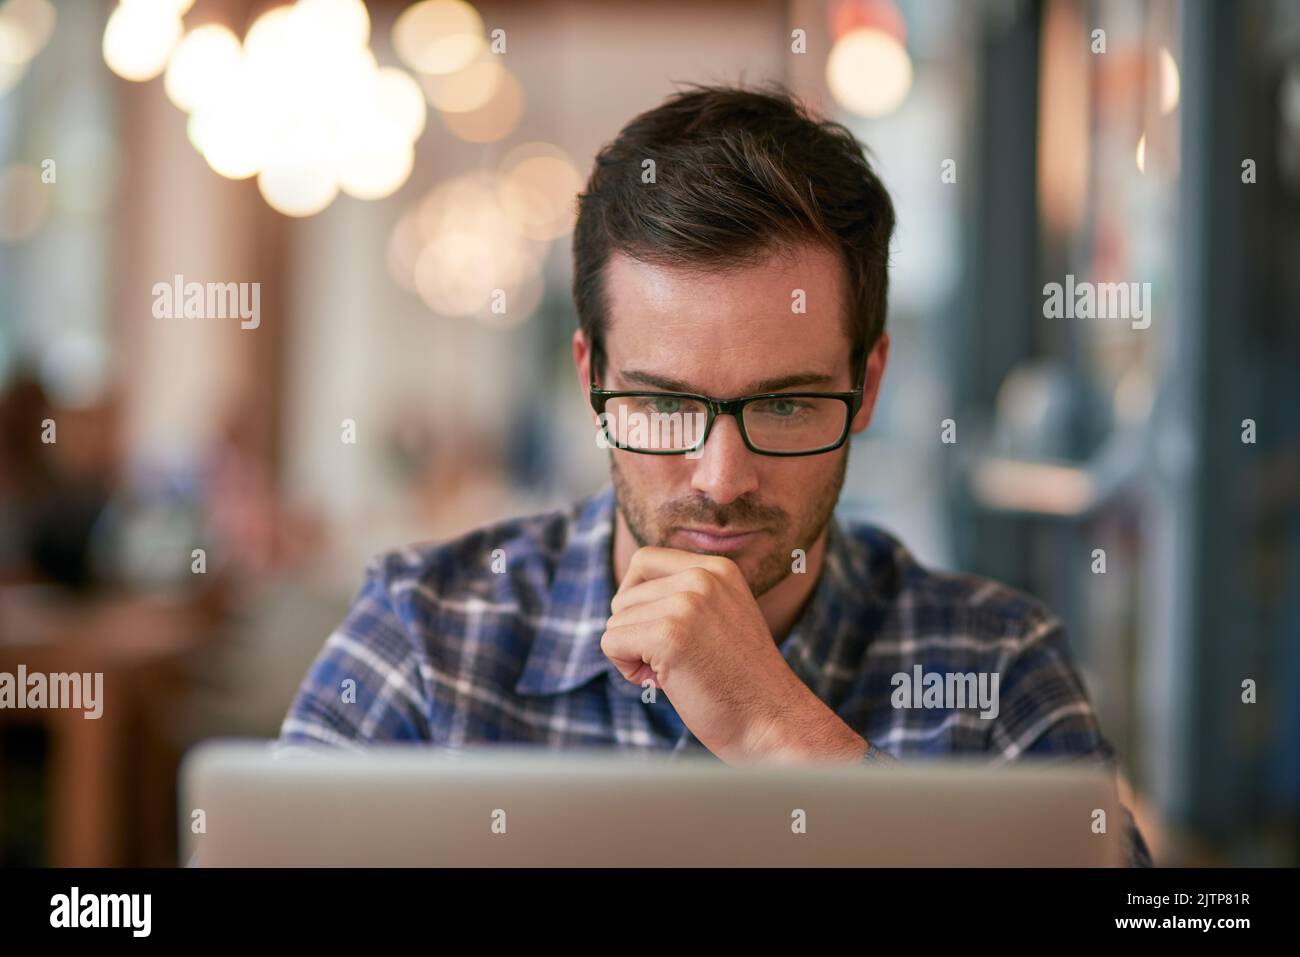 Do not disturb - unlimited browsing in process. a young man using his laptop while sitting in a coffee shop. Stock Photo